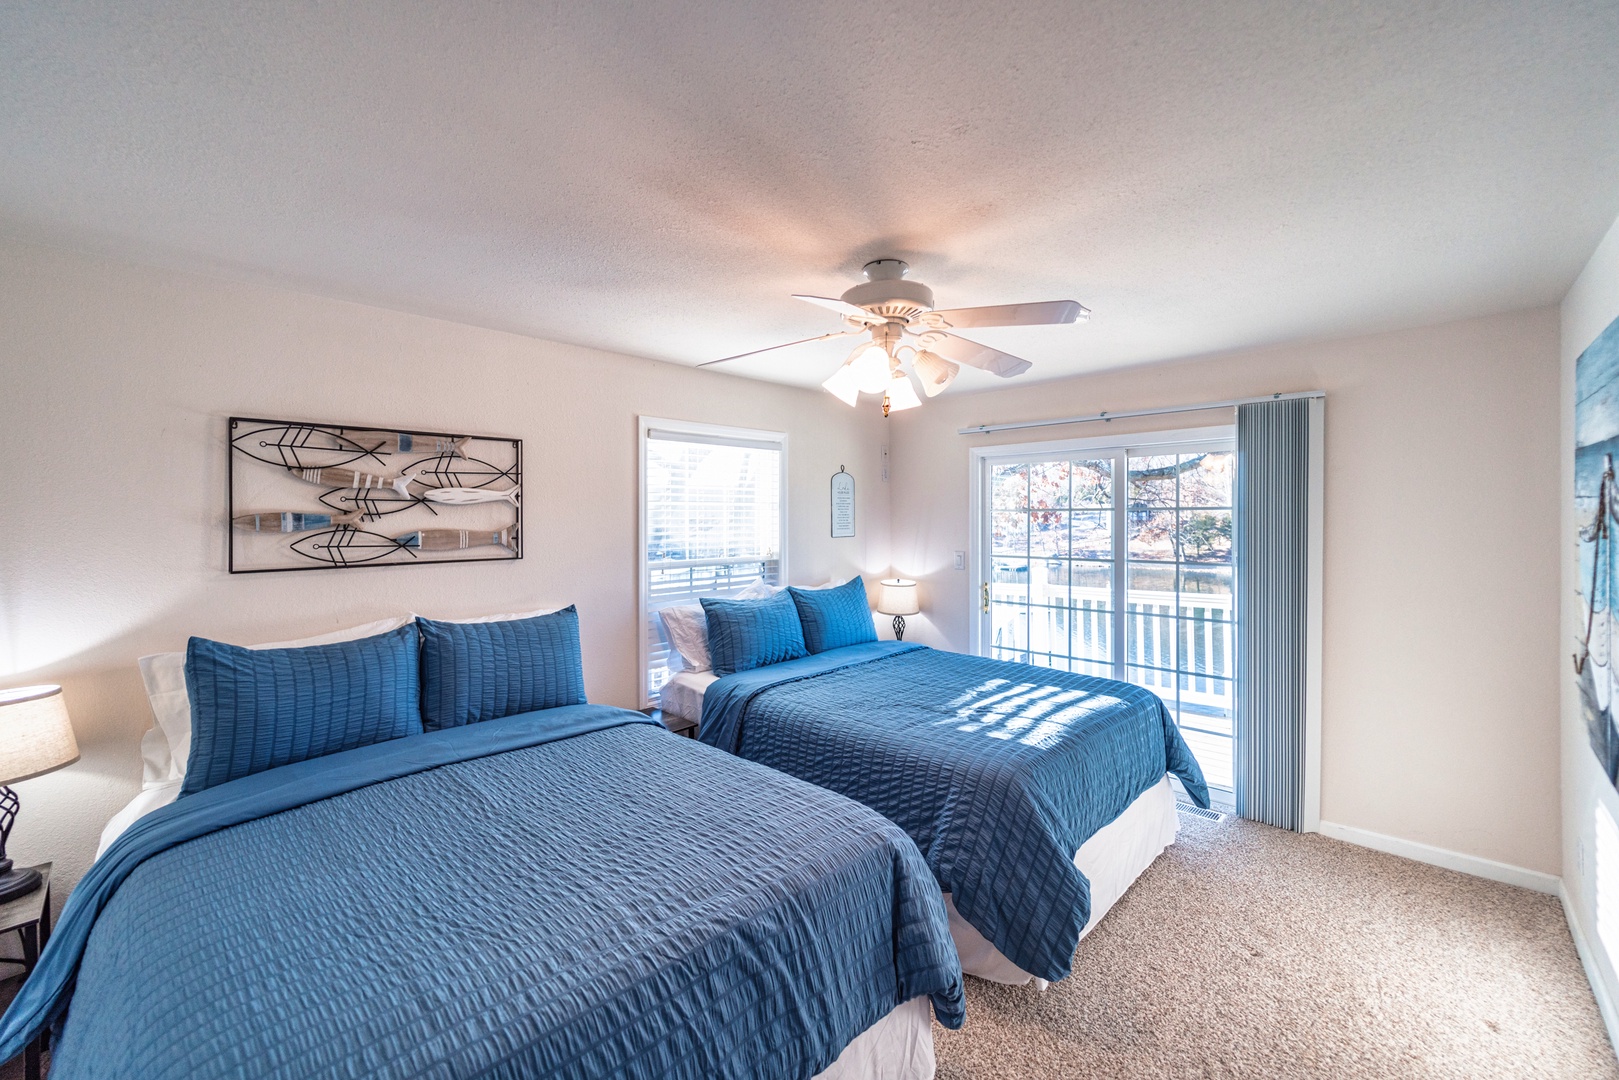 The second upper-level bedroom offers a pair of queen beds & deck access